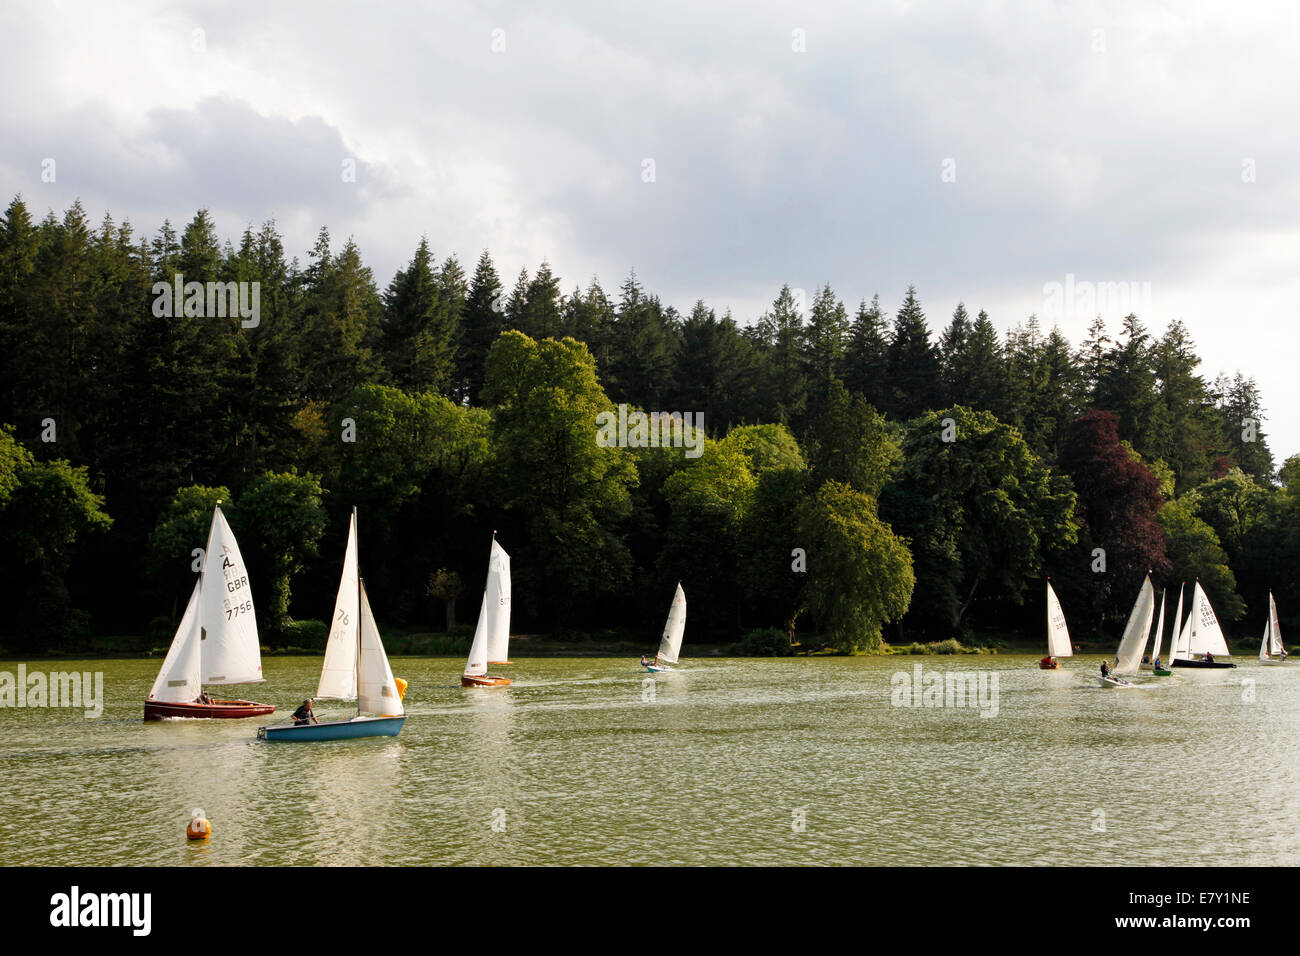 Sailing on the lake at Shearwater near Warminster in Wiltshire. Stock Photo